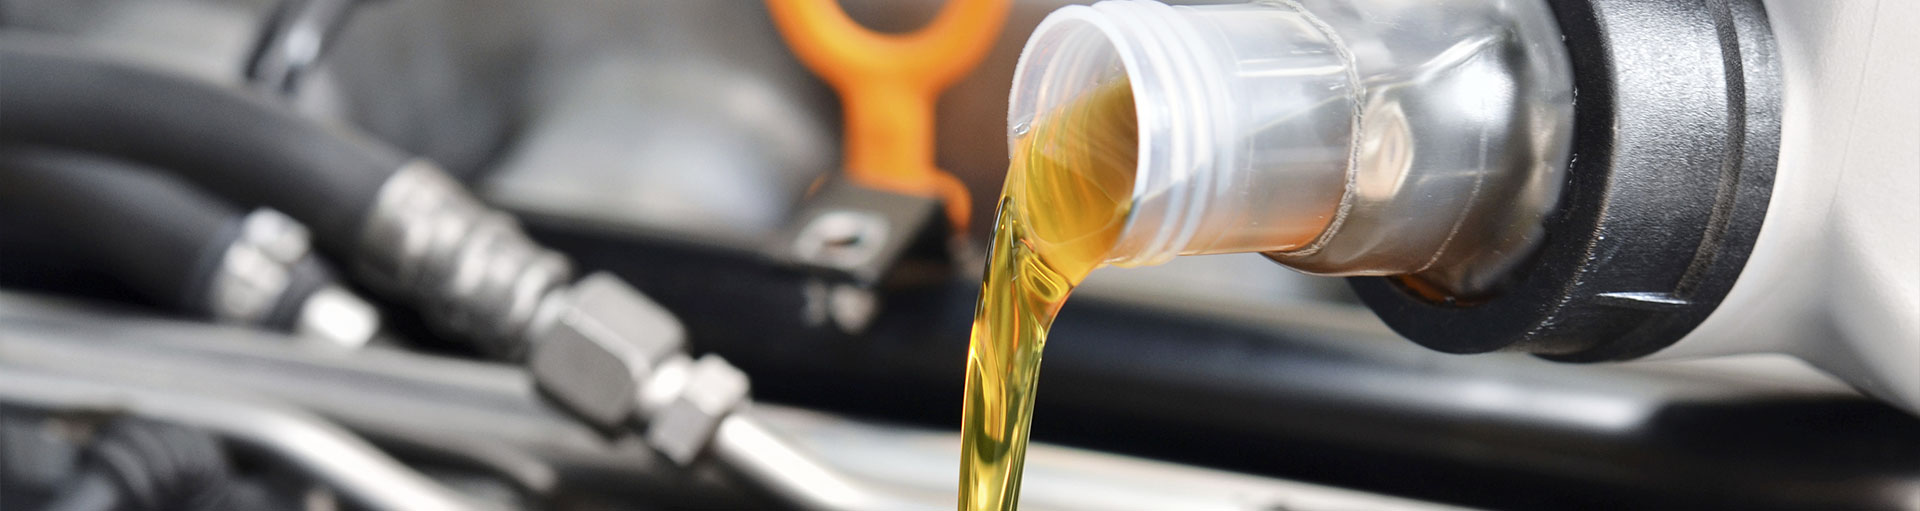 Types of Oil Changes